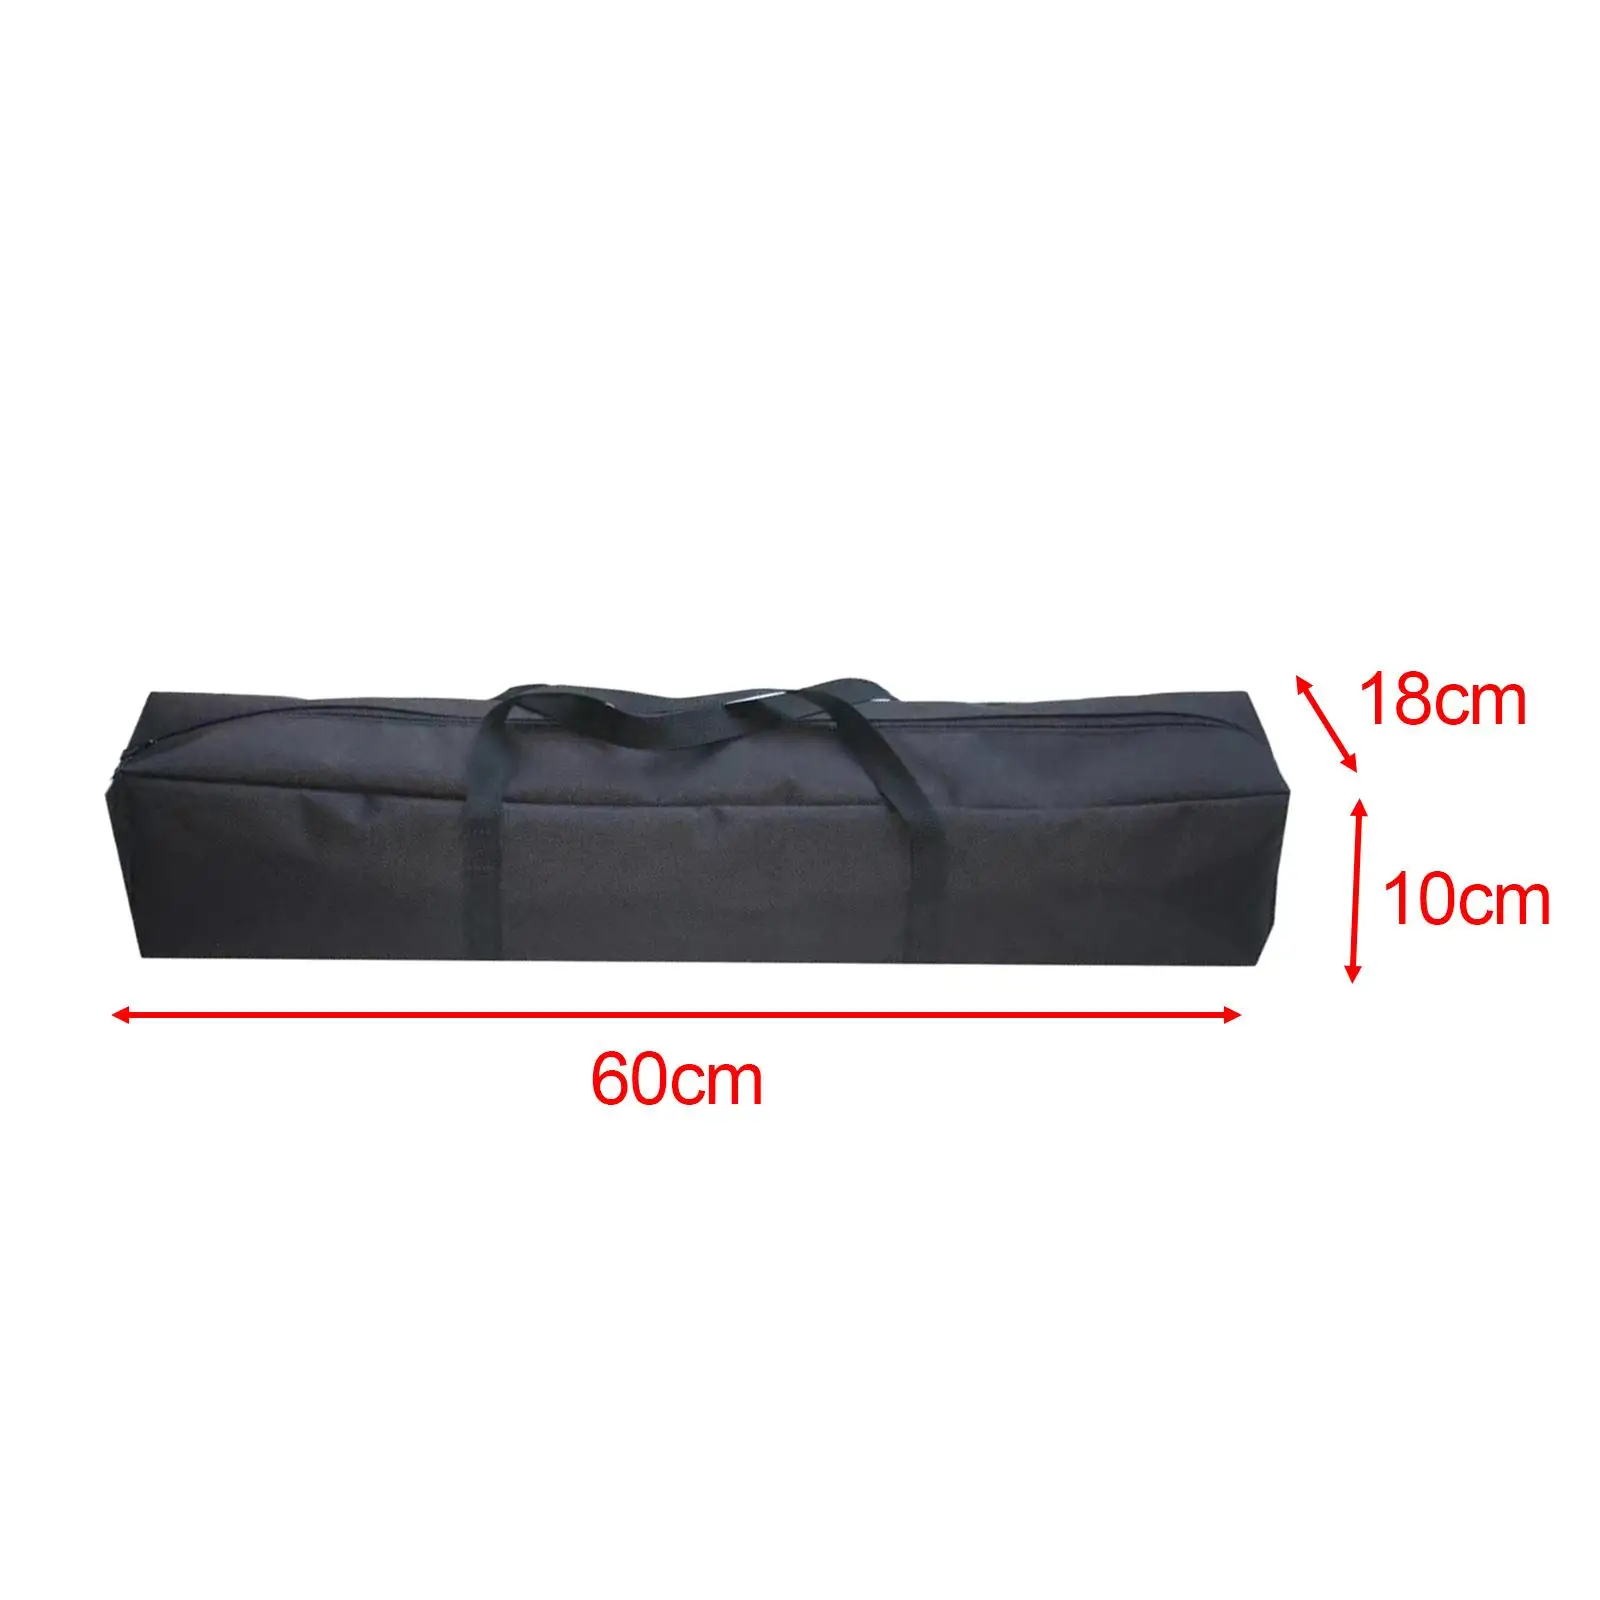 Tent Poles Storage Bag Camping Gear Organizer for Traveling Backpacking